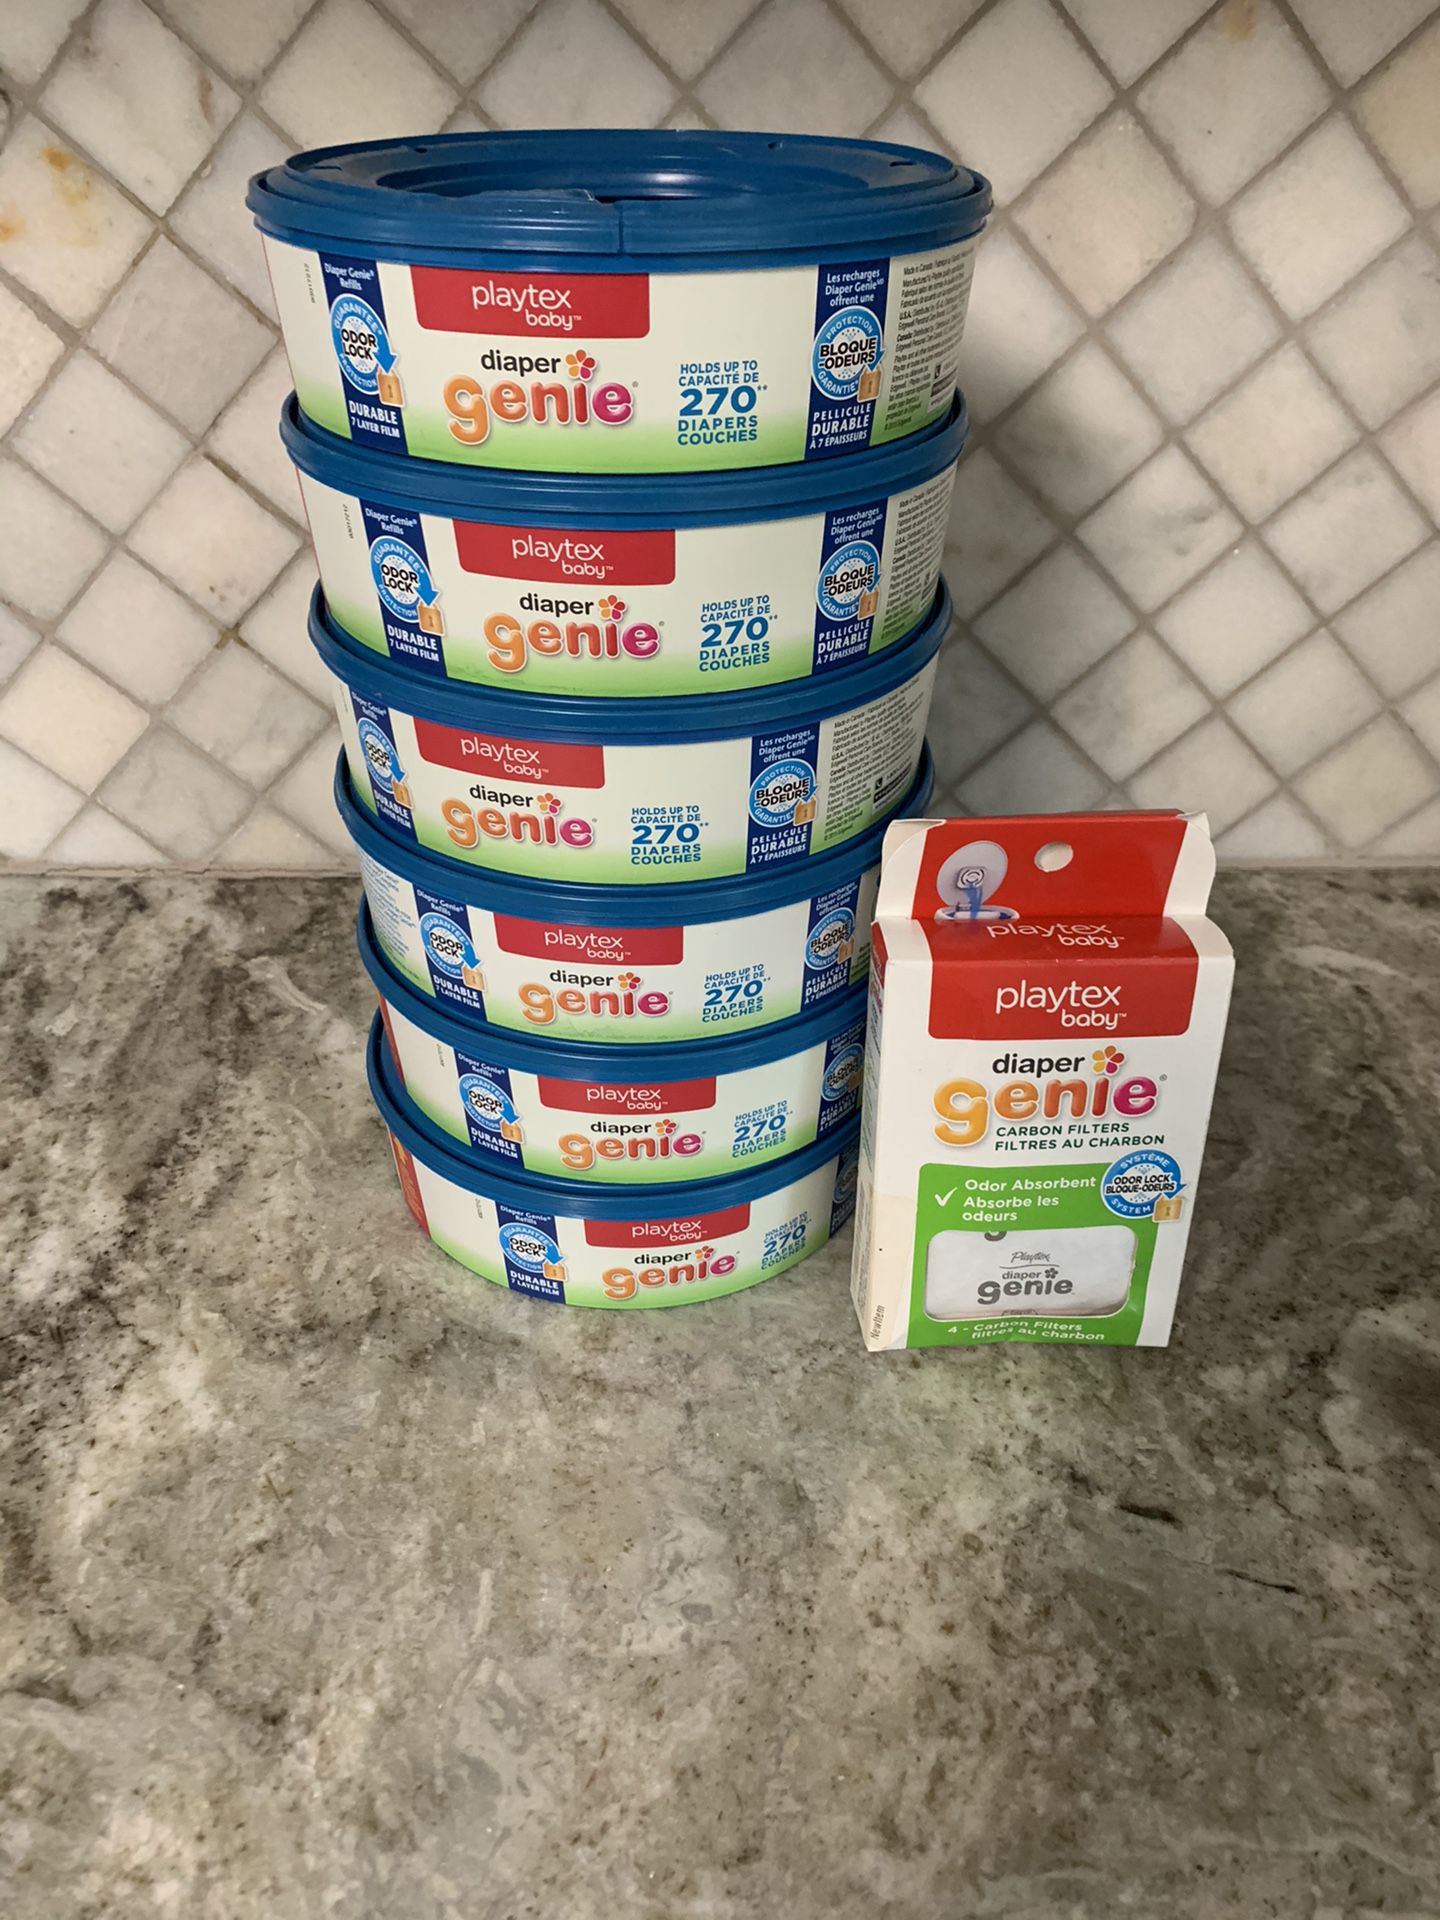 Diaper genie refills and 4 carbon filters